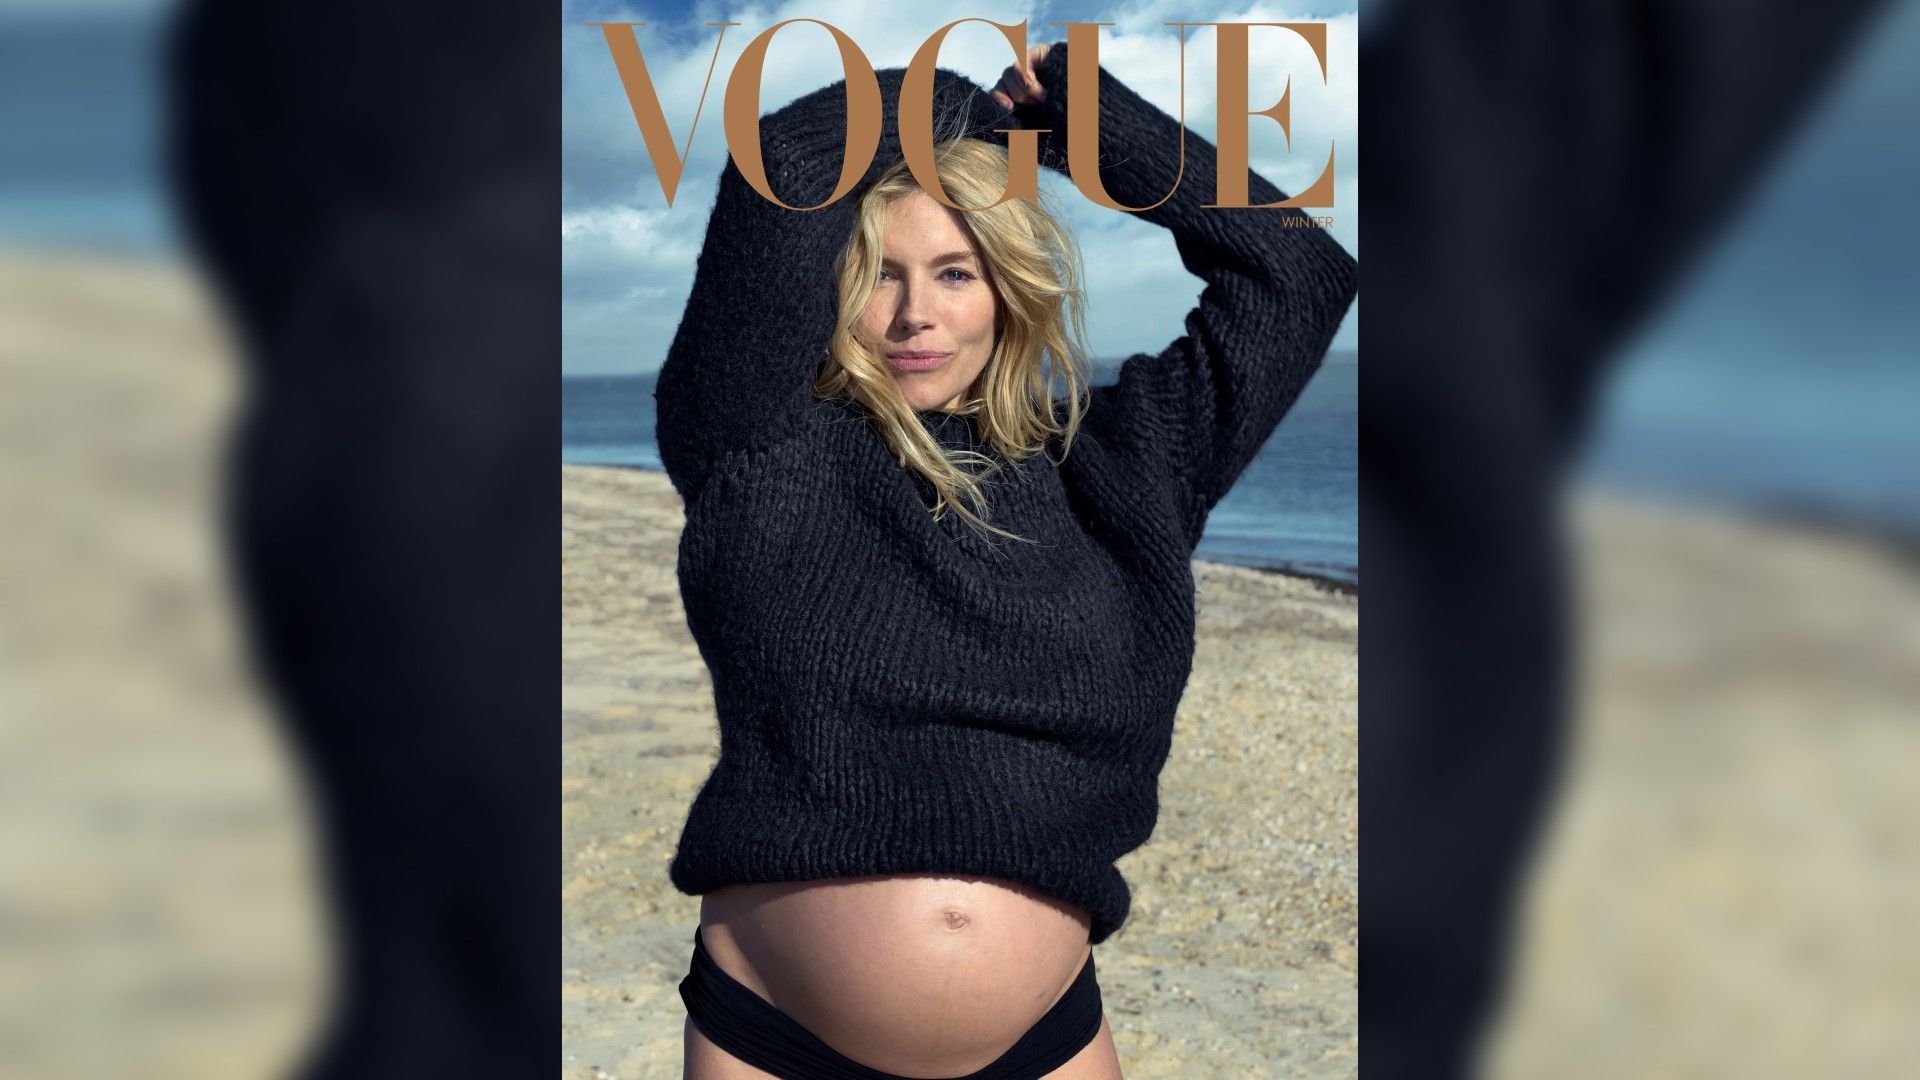 Sienna Miller, Pregnant at 41, Bares Belly for Vogue Cover